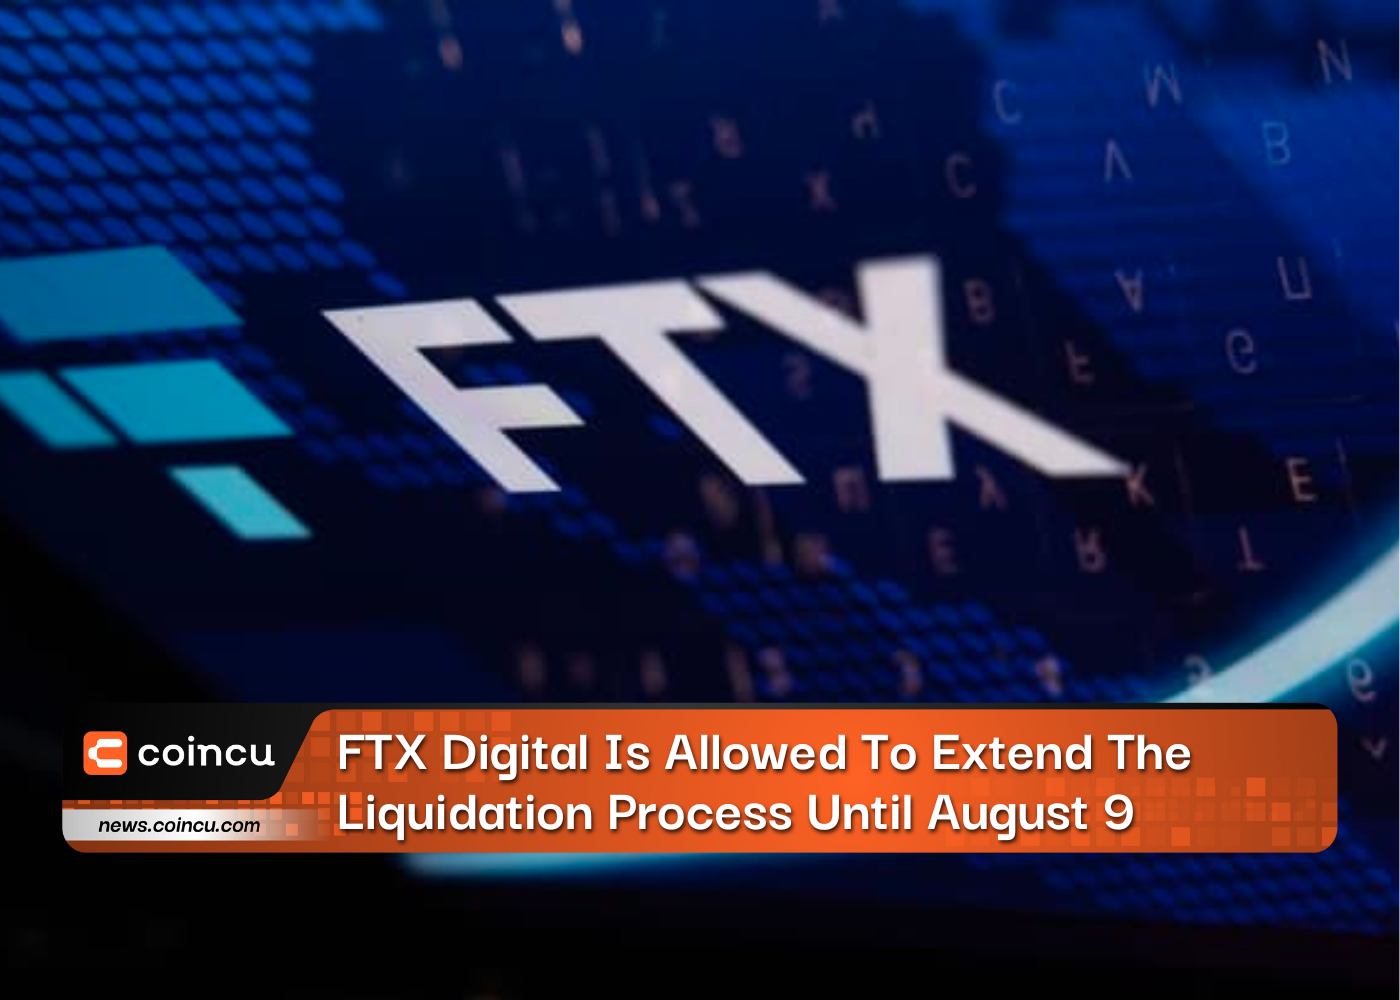 FTX Digital Is Allowed To Extend The Liquidation Process Until August 9